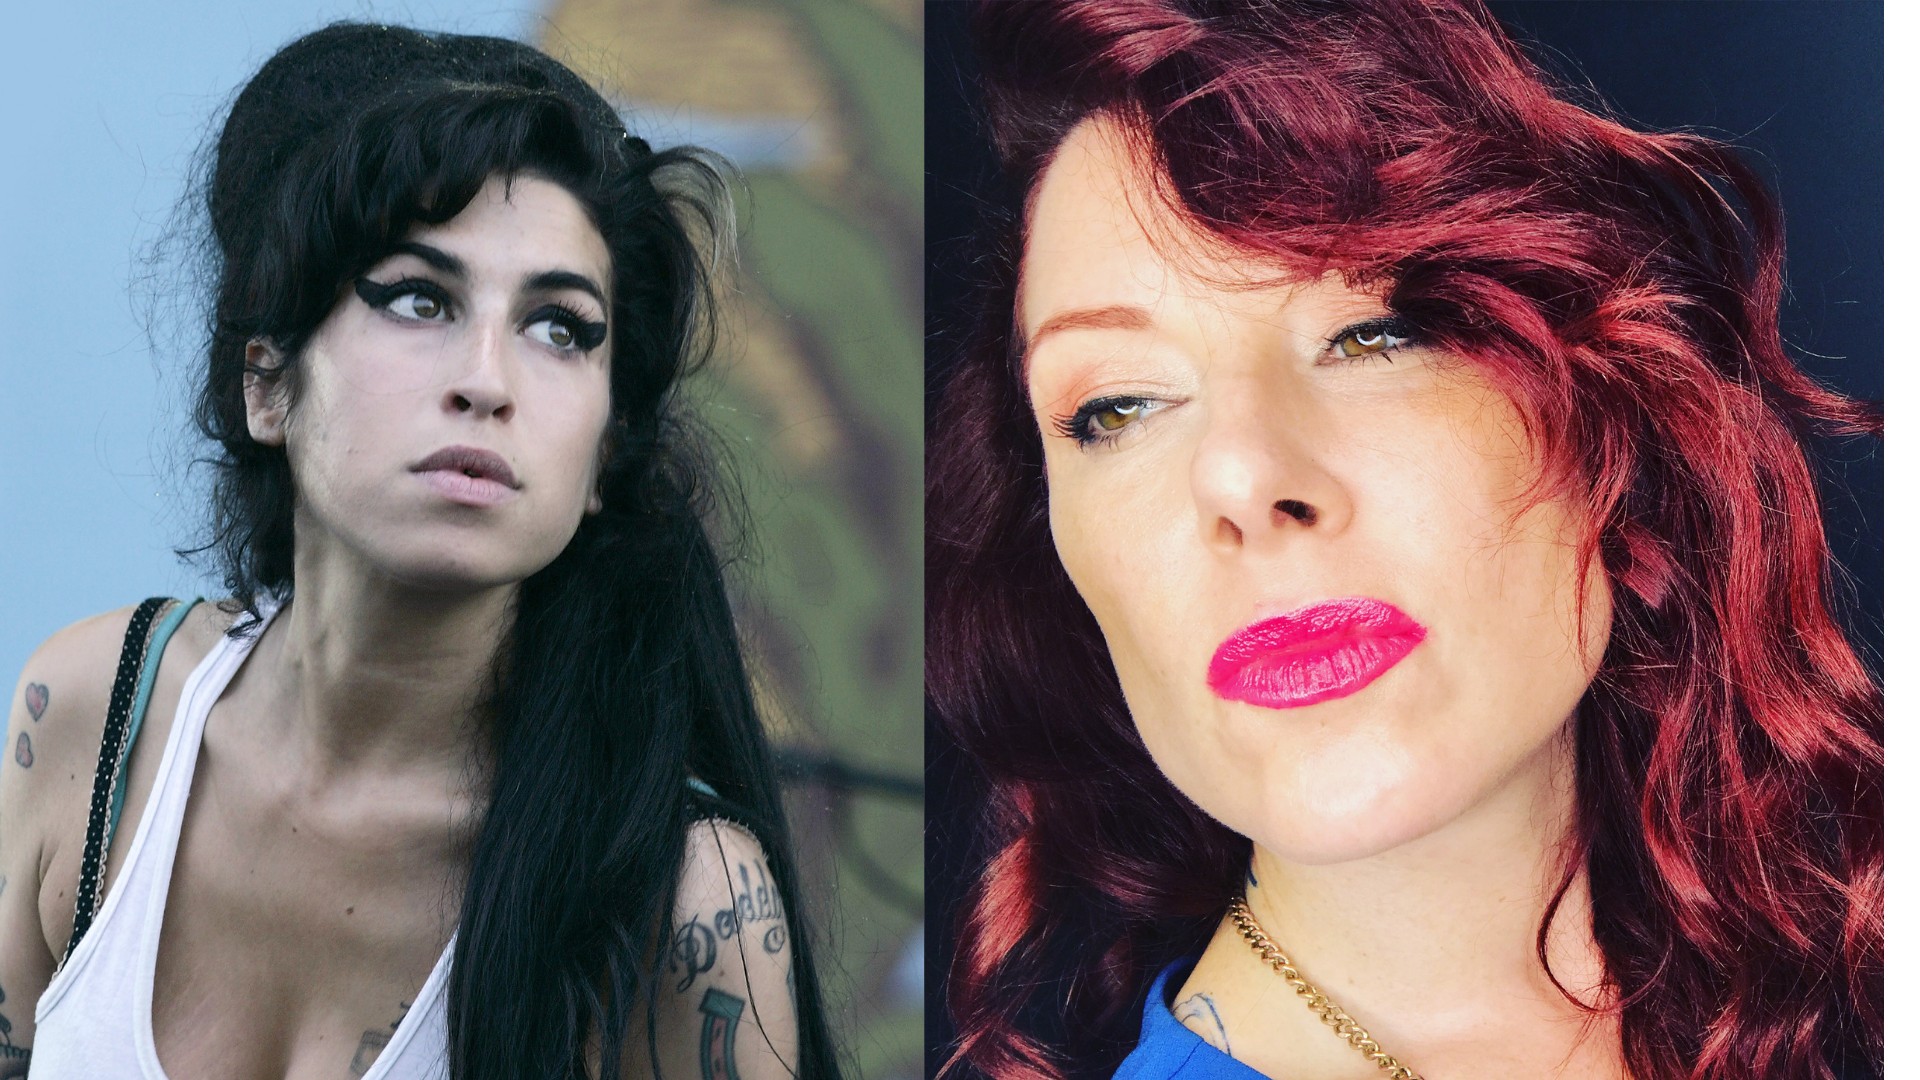 Ti år kranium gammel We Found the Actual Valerie From Amy Winehouse's Song 'Valerie'